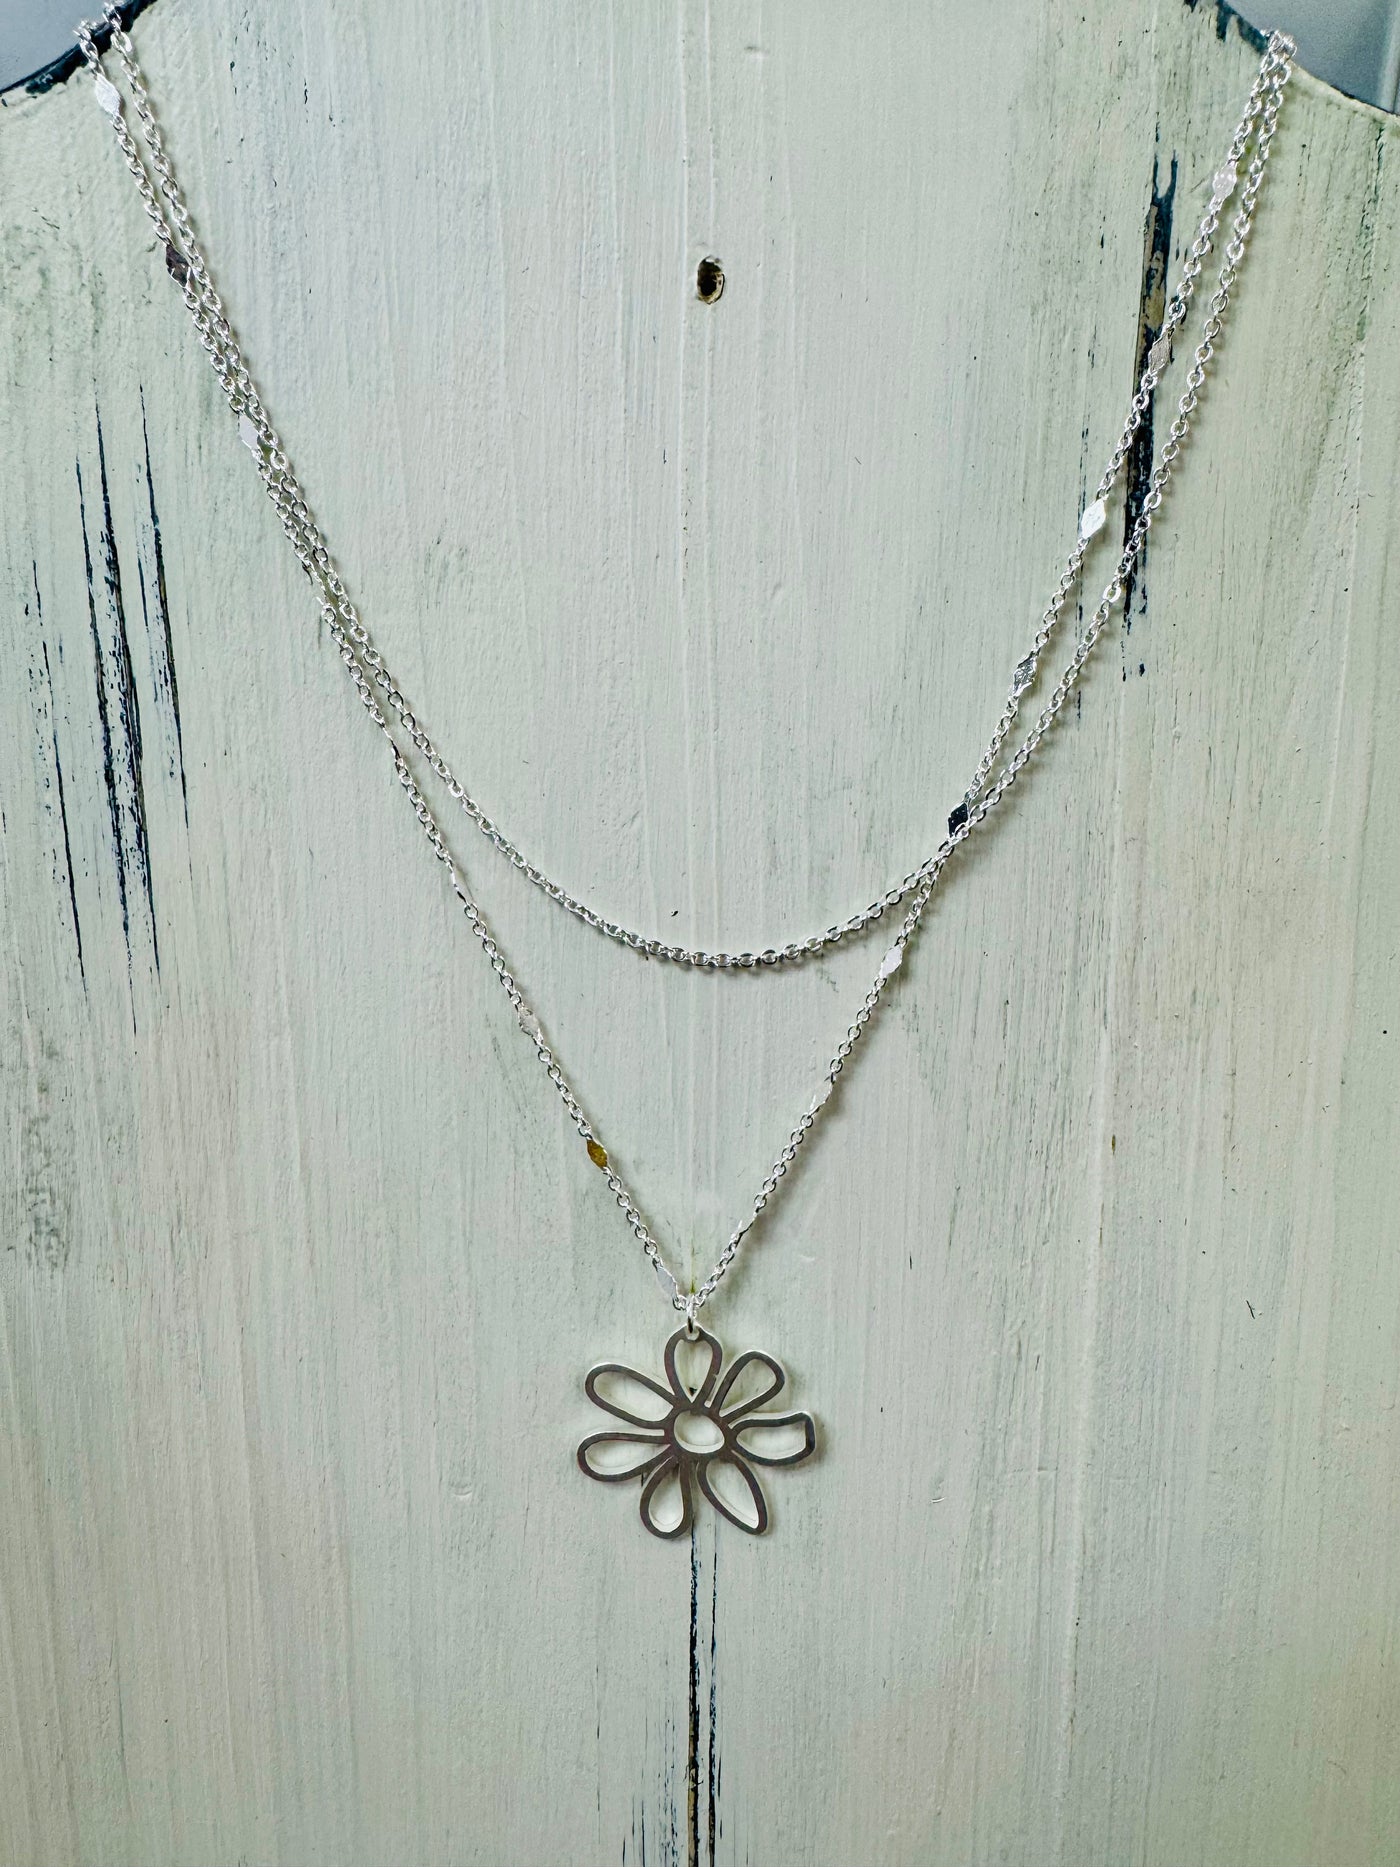 Layered Chain with Open Flower Charm Necklace Set (2 Colors)